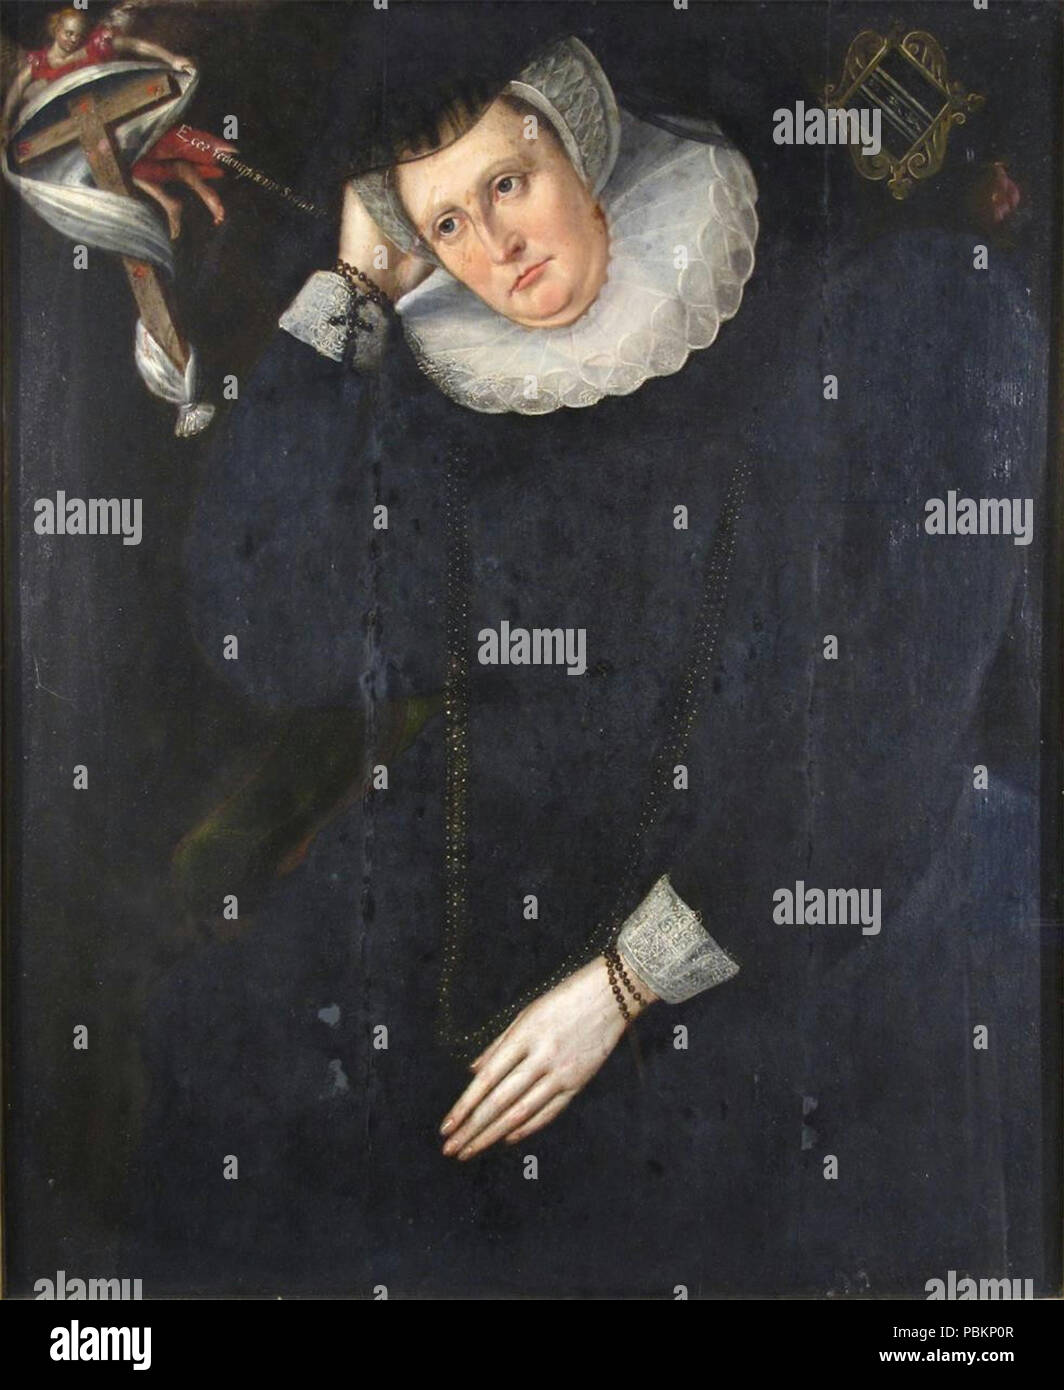 . English: Late C16th, c. 1592, oil portrait of a member of the Browne and or Dormer family, (35 x 29 inches). Mary, the daughter of Sir William Dormer (d.1575) by his second wife, Dorothy, the daughter of Anthony Catesby, esquire), who married Anthony Browne (22 July 1552 – 29 June 1592). OR: Elizabeth Browne (d.1631), who married Robert Dormer, the son of Sir William Dormer by his second wife, Dorothy Catesby (d.1613). between circa 1592 and circa 1600 887 Late C16th oil portrait of a member of the Browne and or Dormer family, (35 x 29 inches), c. 1592 Stock Photo